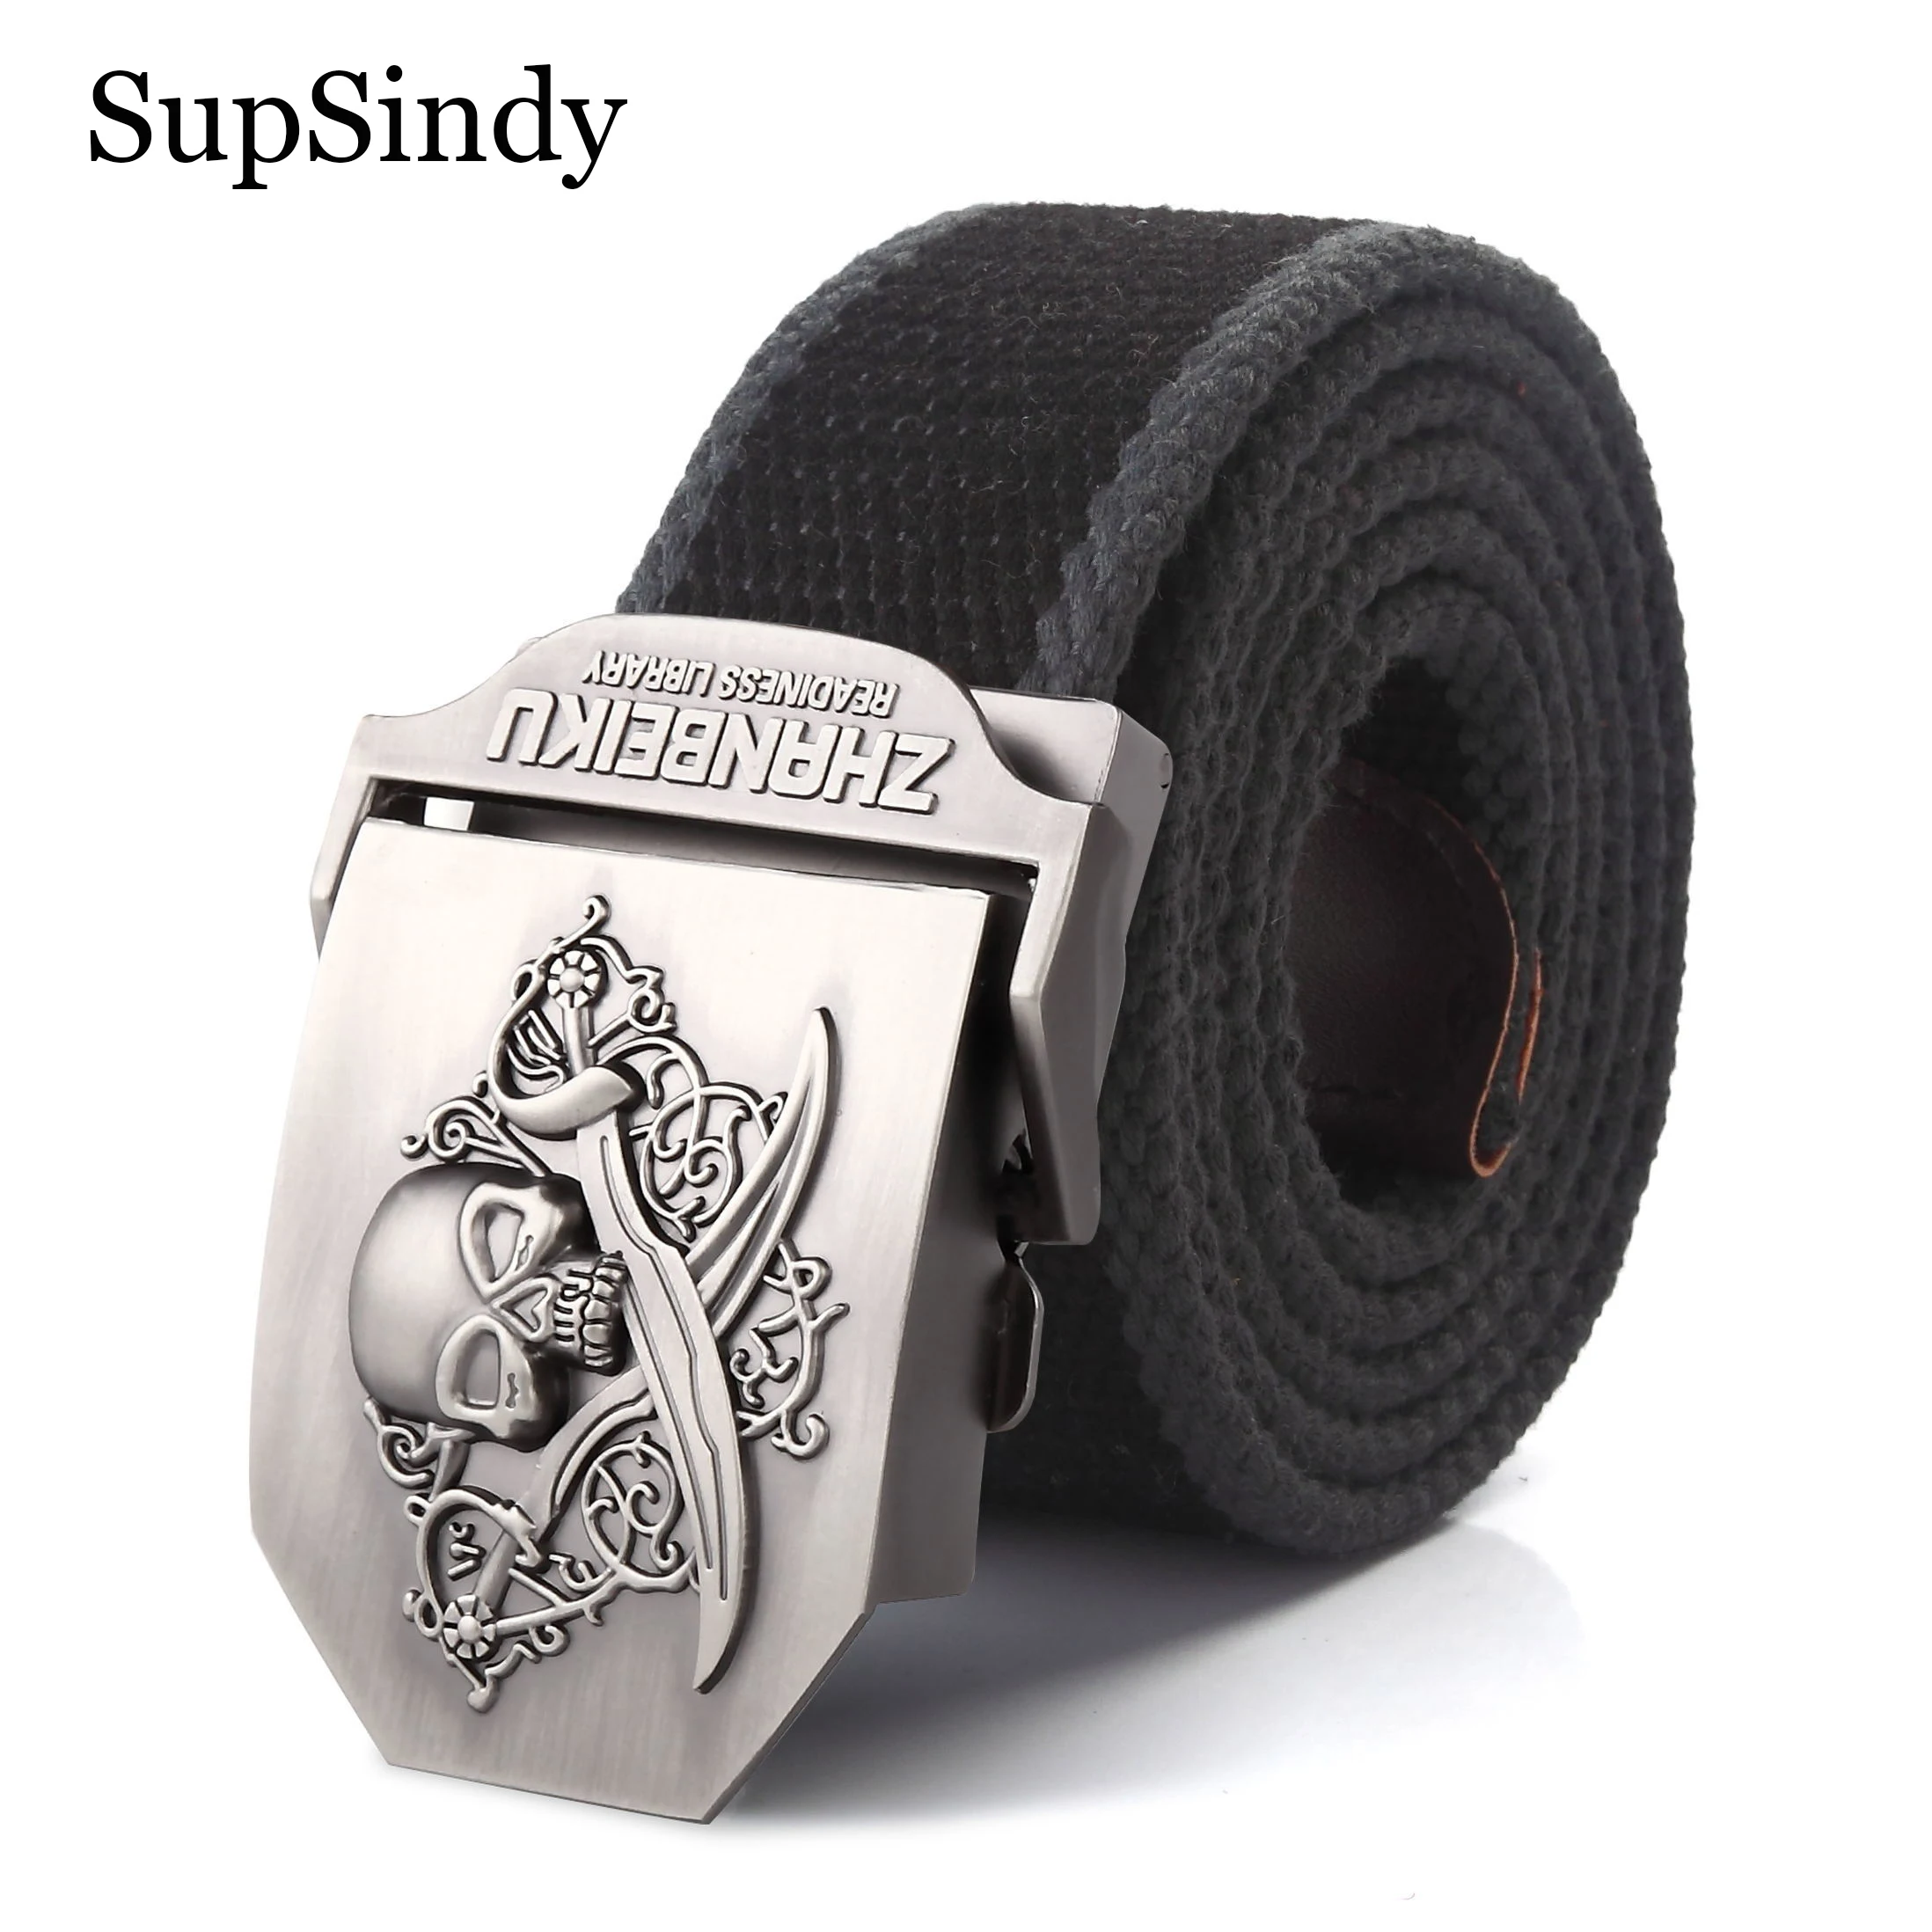 SupSindy Men Canvas Belt Pirate Skull Metal Buckle Army Military Tactical Belts for Men Fashion Jeans Waistband Male Strap Black